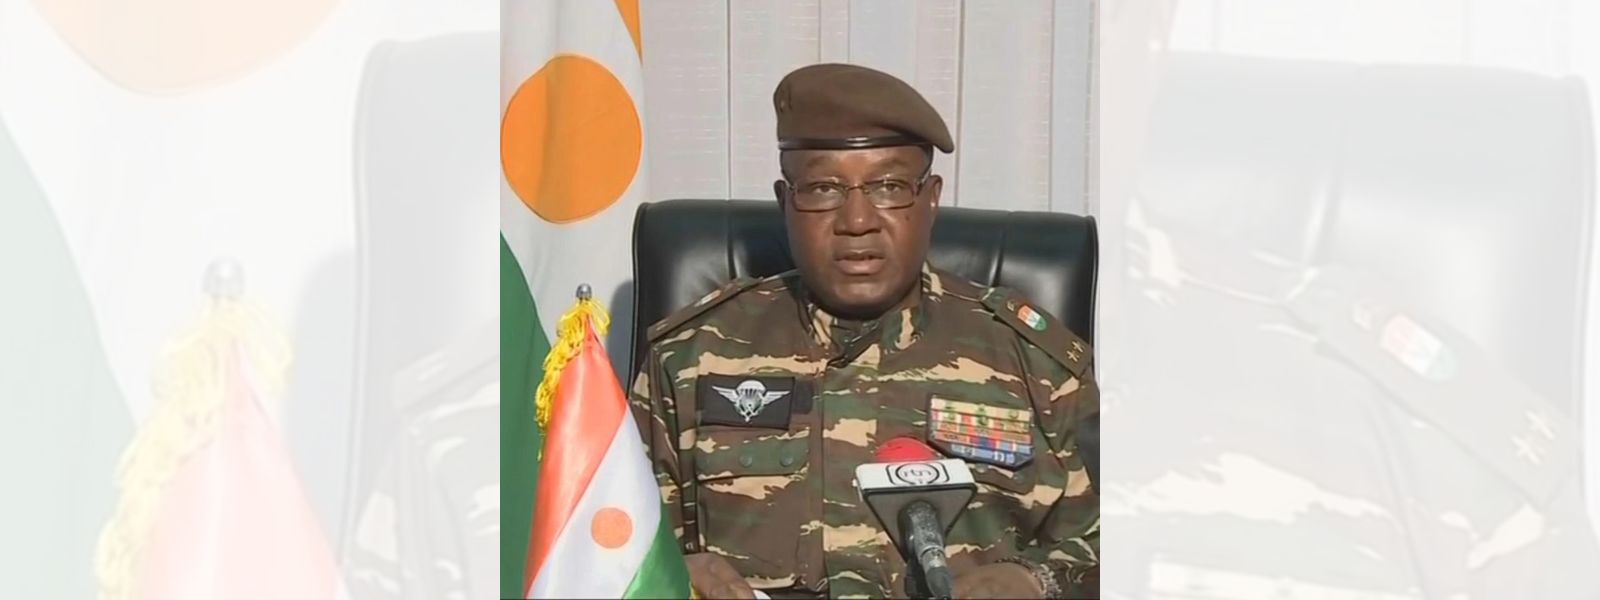 President's Guard Chief claims Niger's leadership